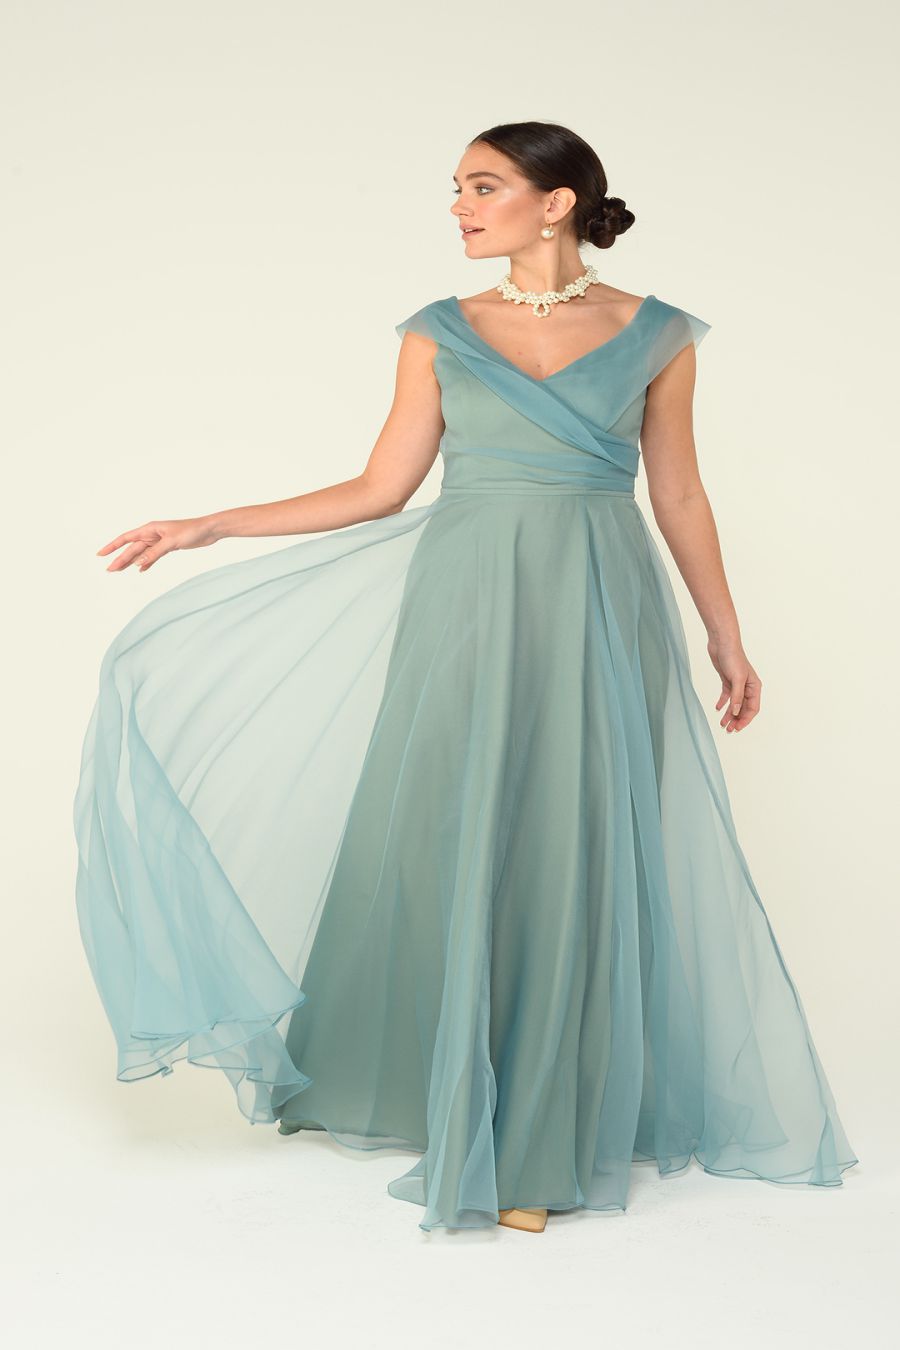 Nour - Mystic Evenings | Evening and Prom Dresses